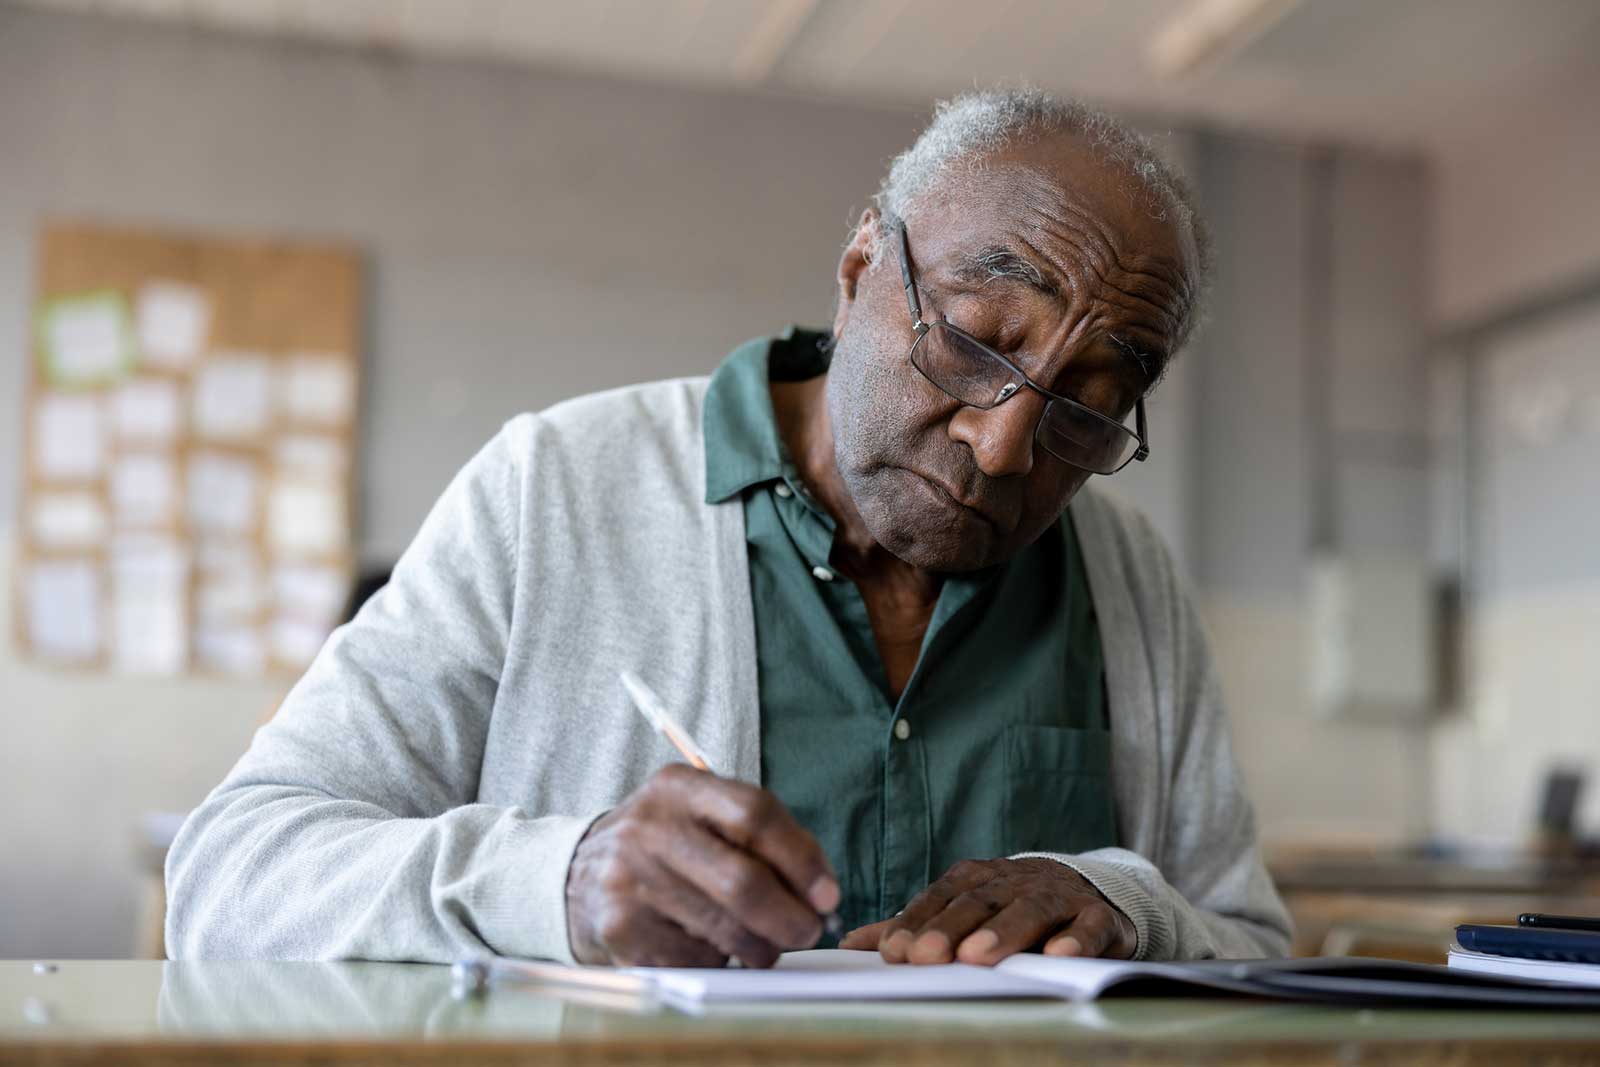 Senior seated at table writing in notebook